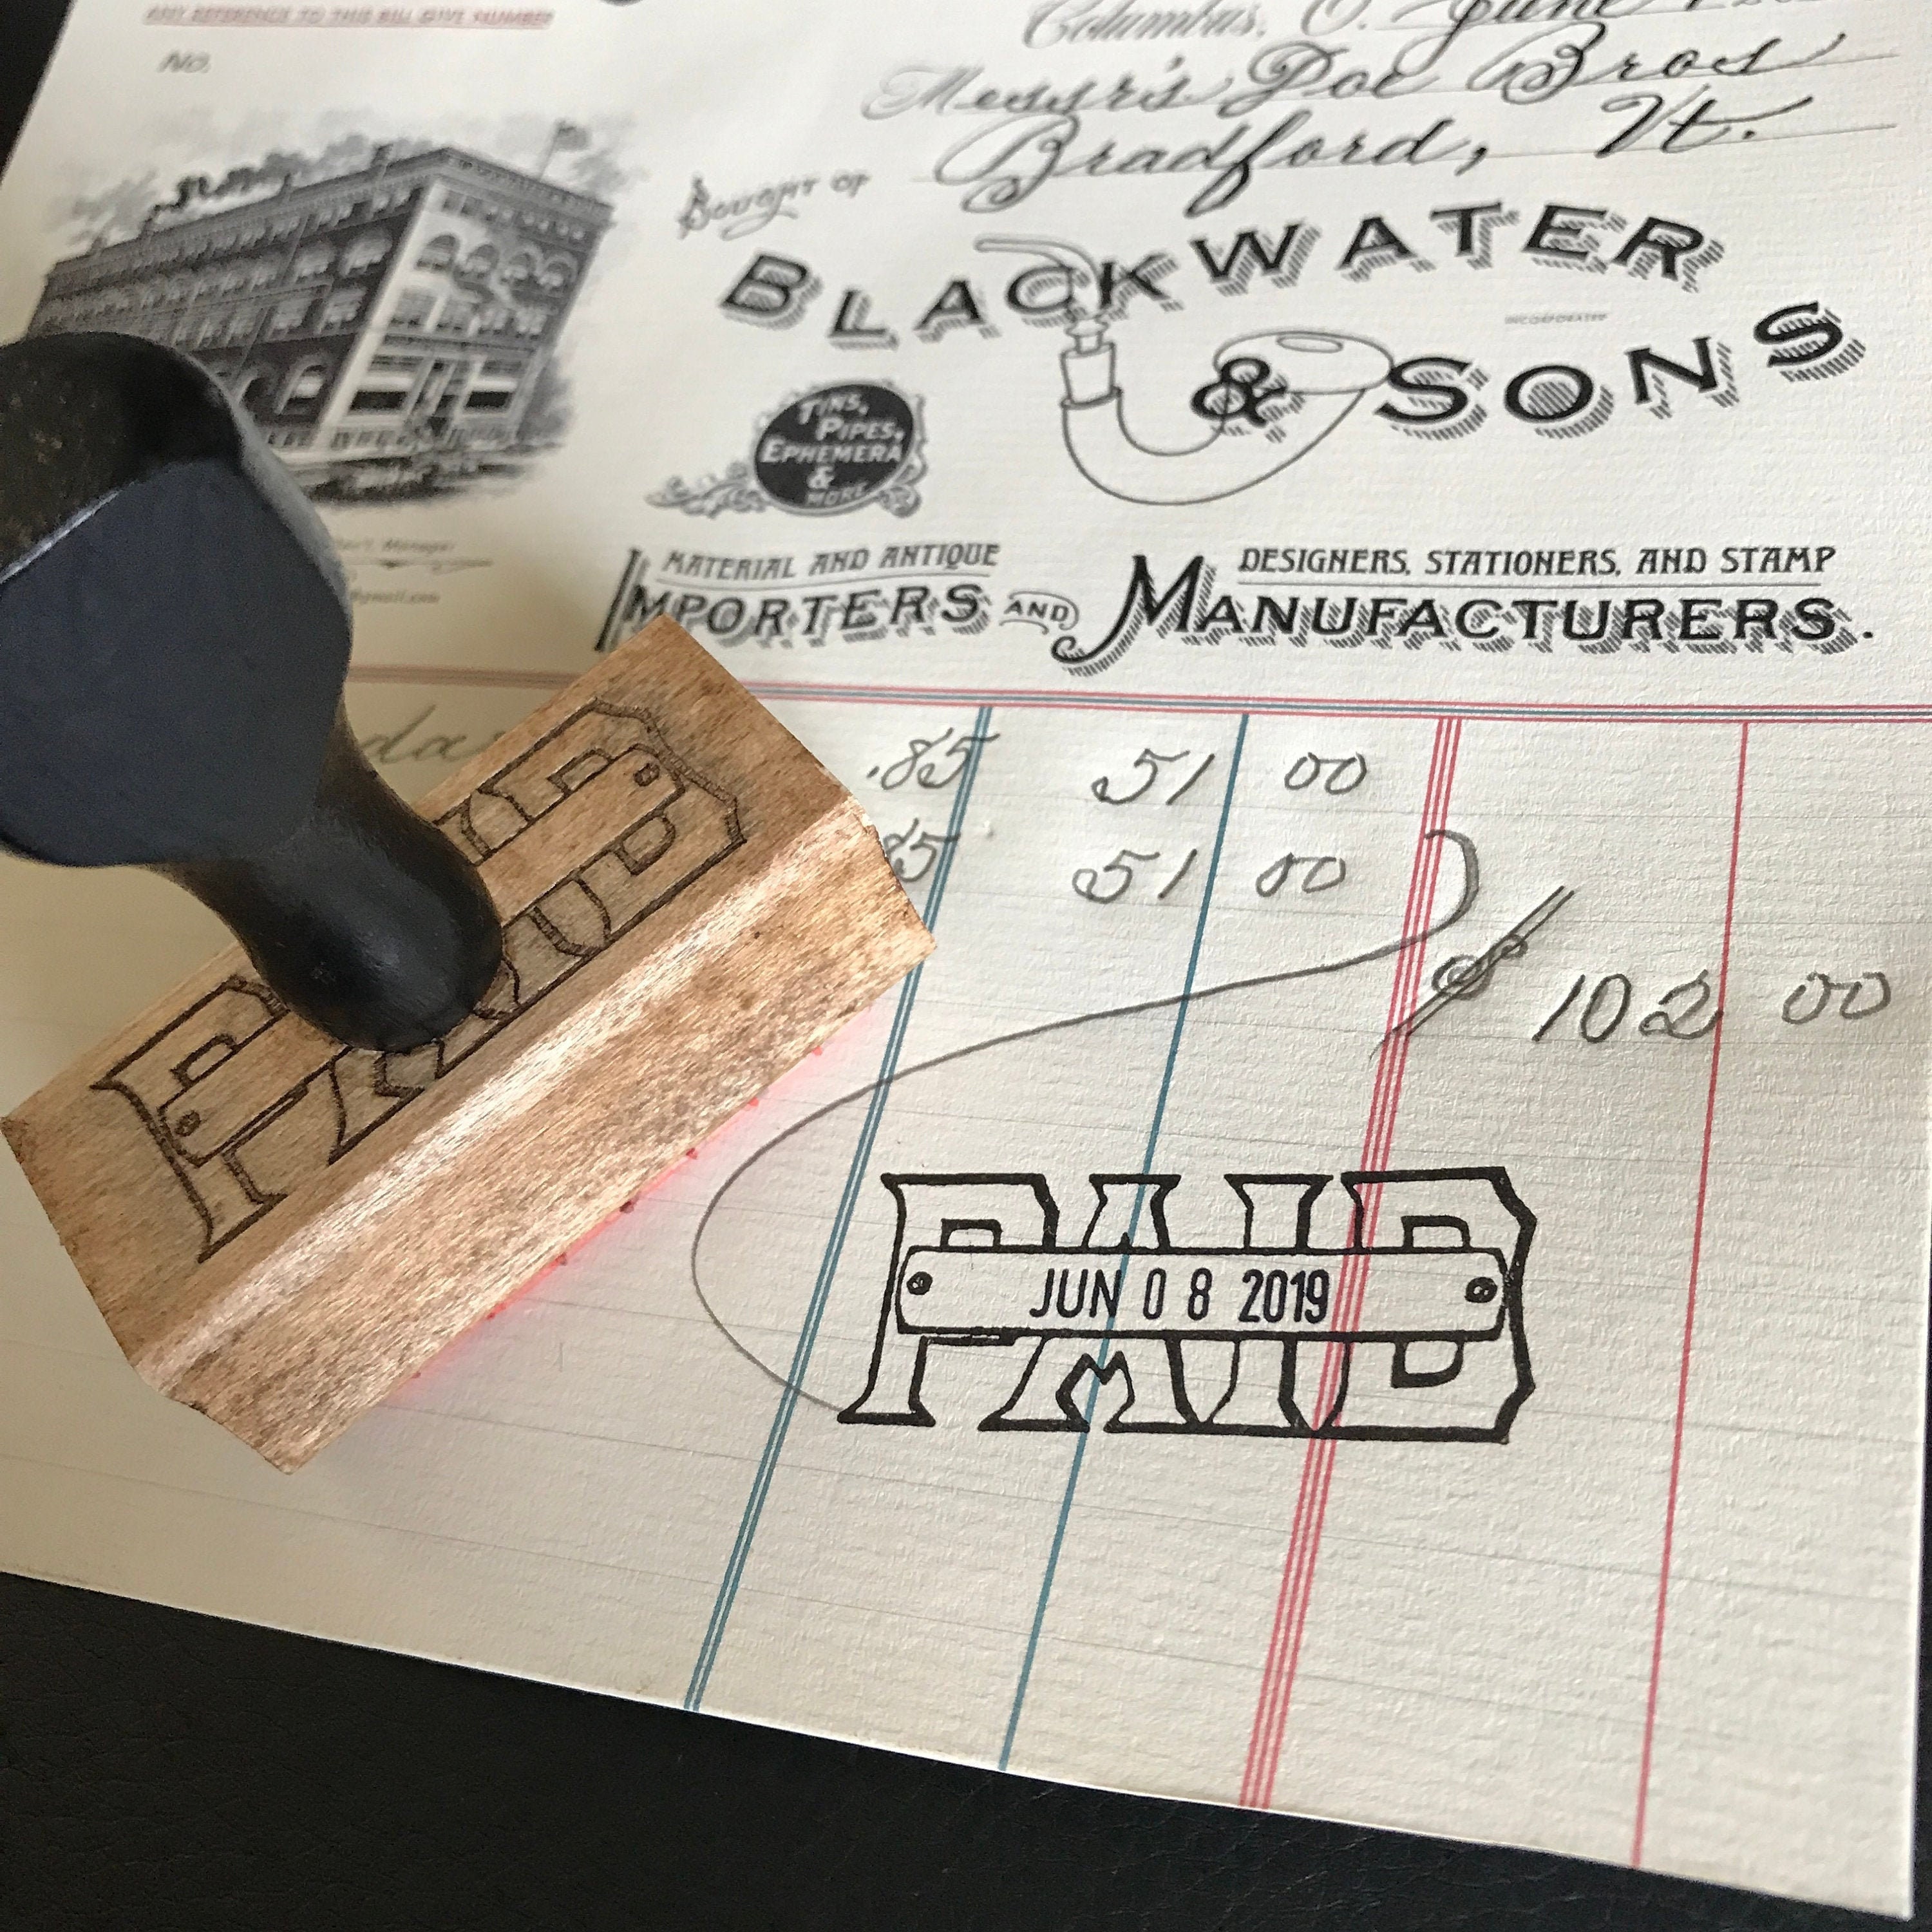 PAID IN FULL THANK YOU Rubber Stamp for office use self-inking